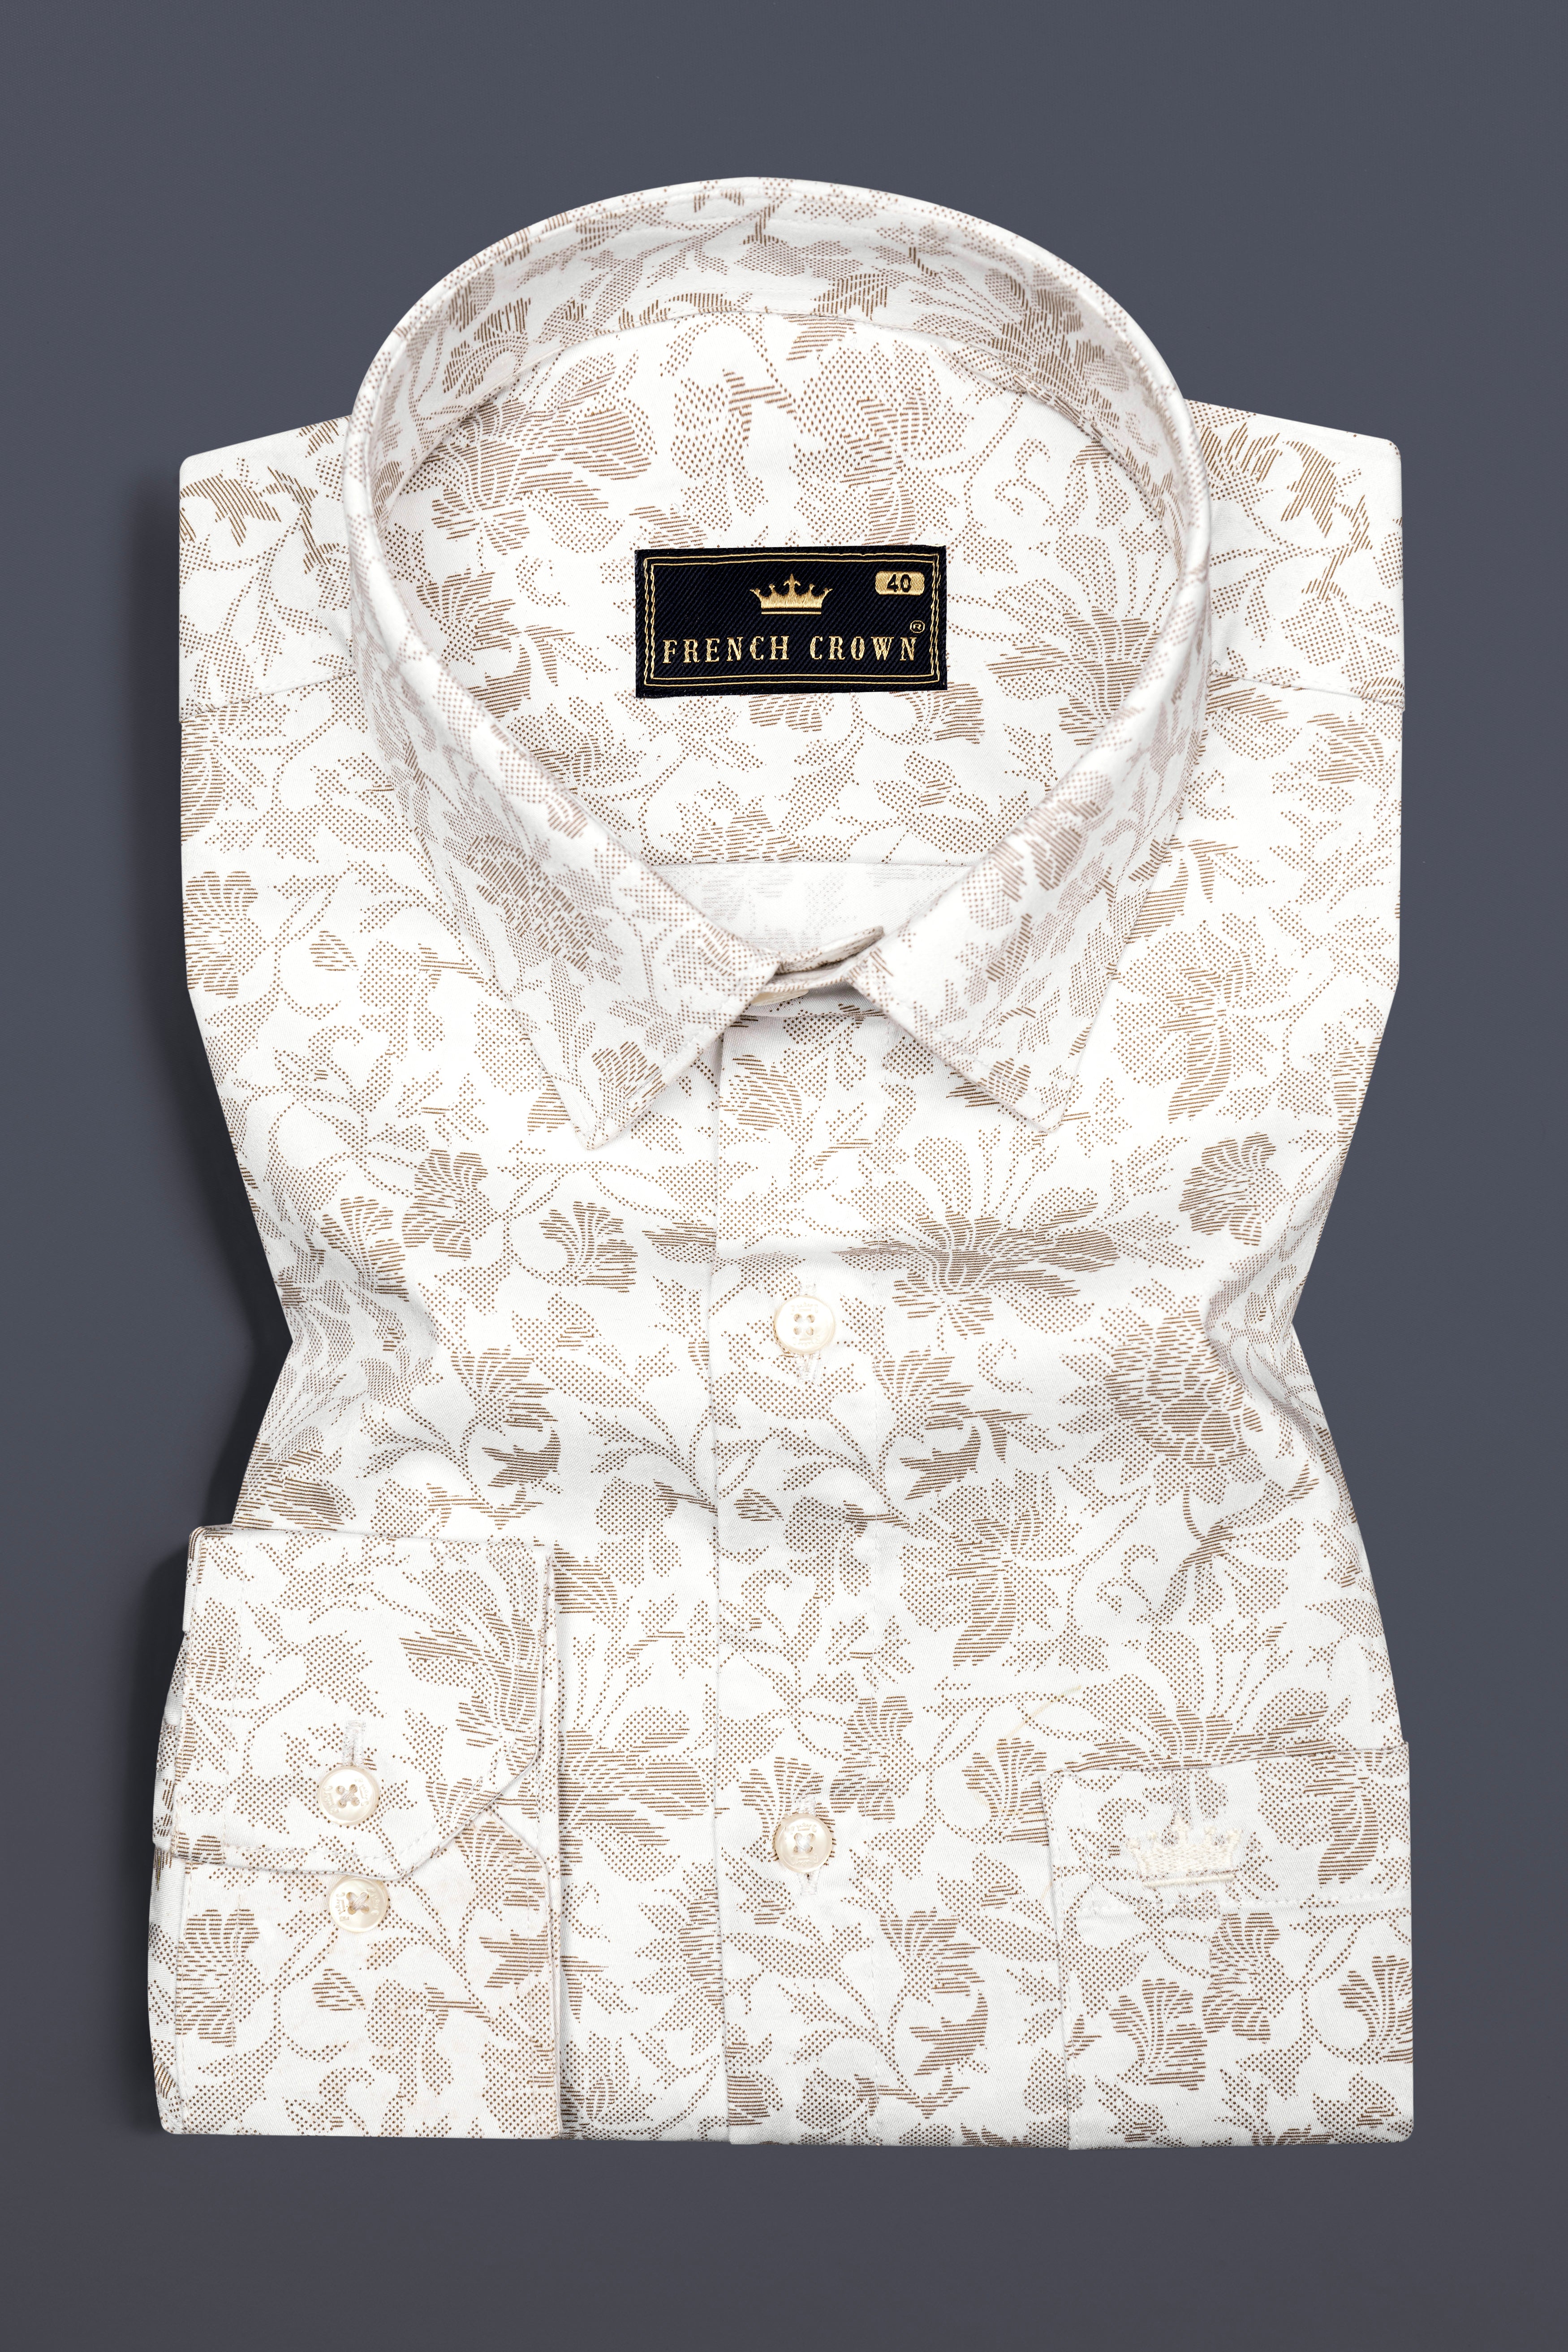 Bright White with Cinereous Brown Flower Printed Super Soft Premium Cotton Shirt